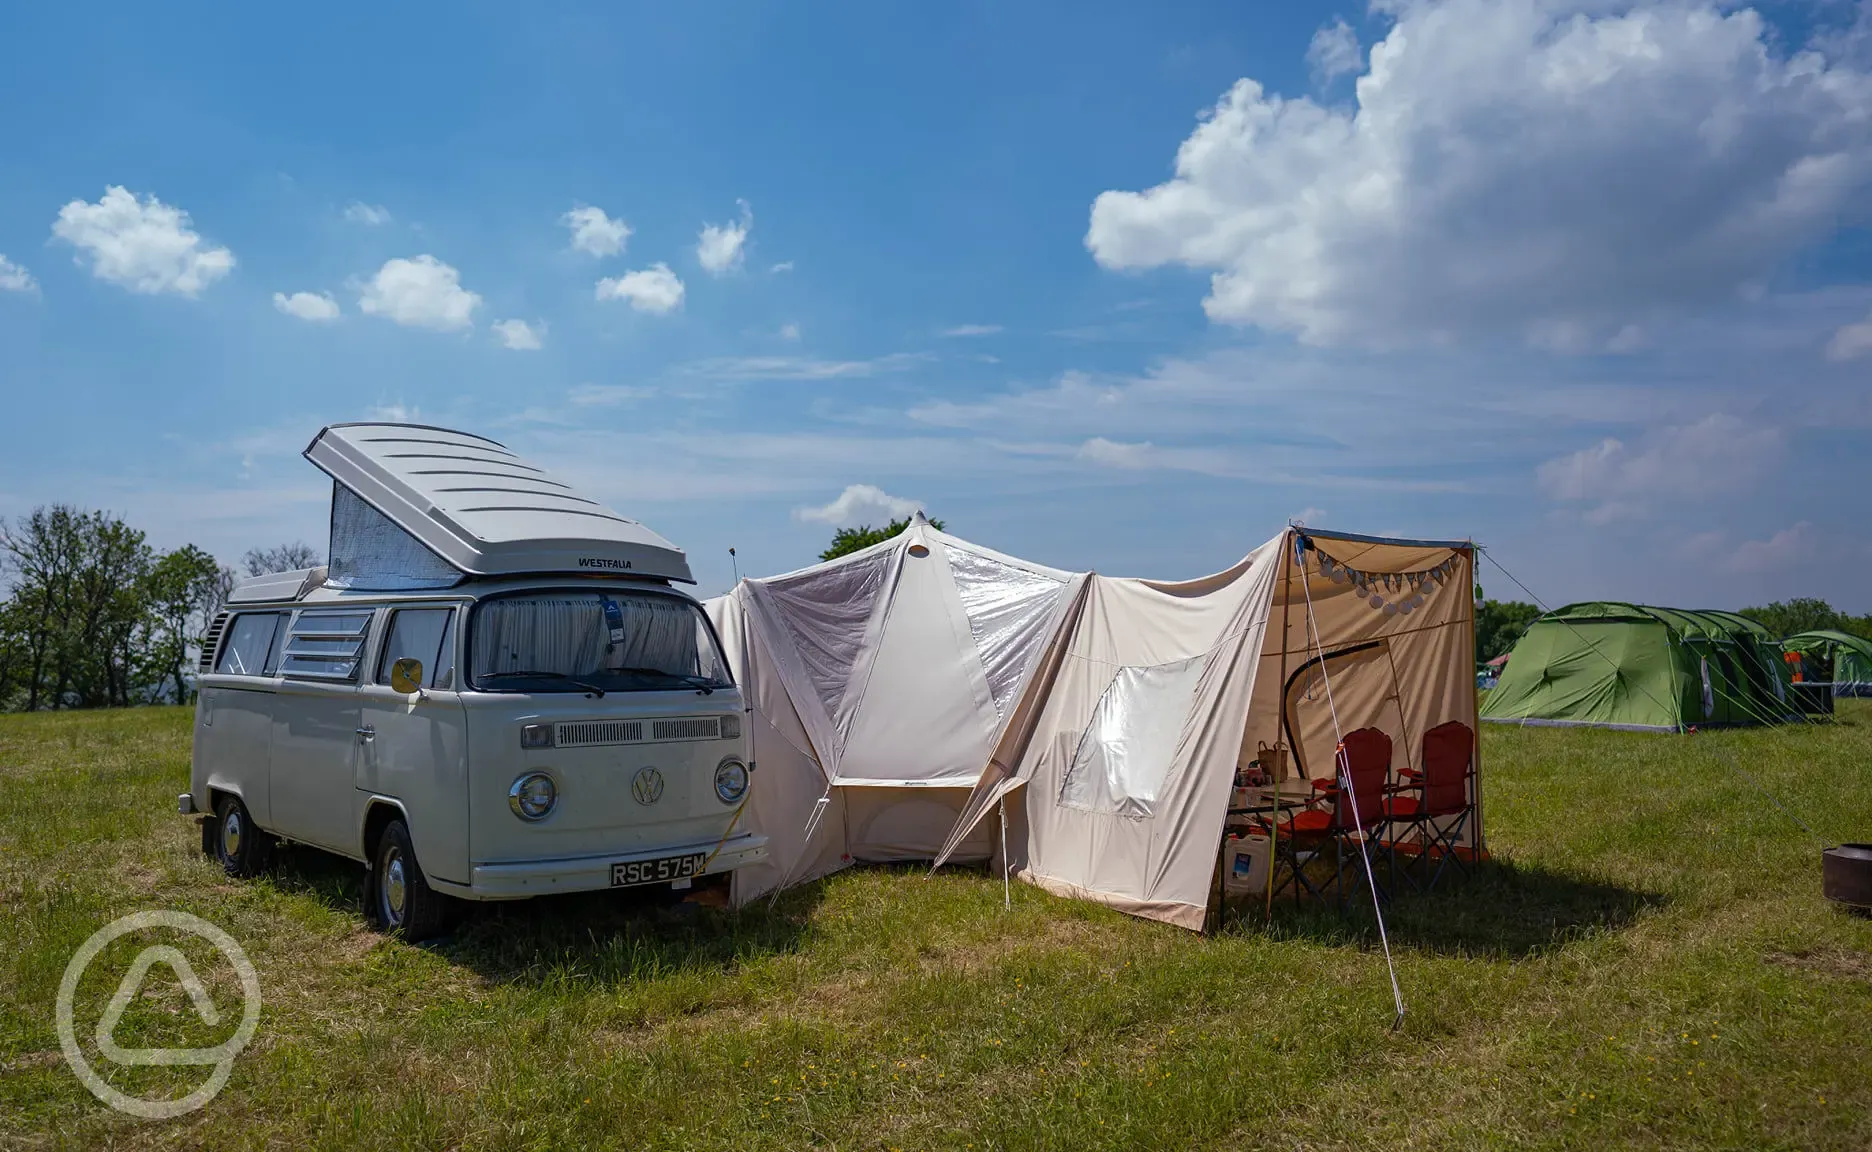 Campervan and awning